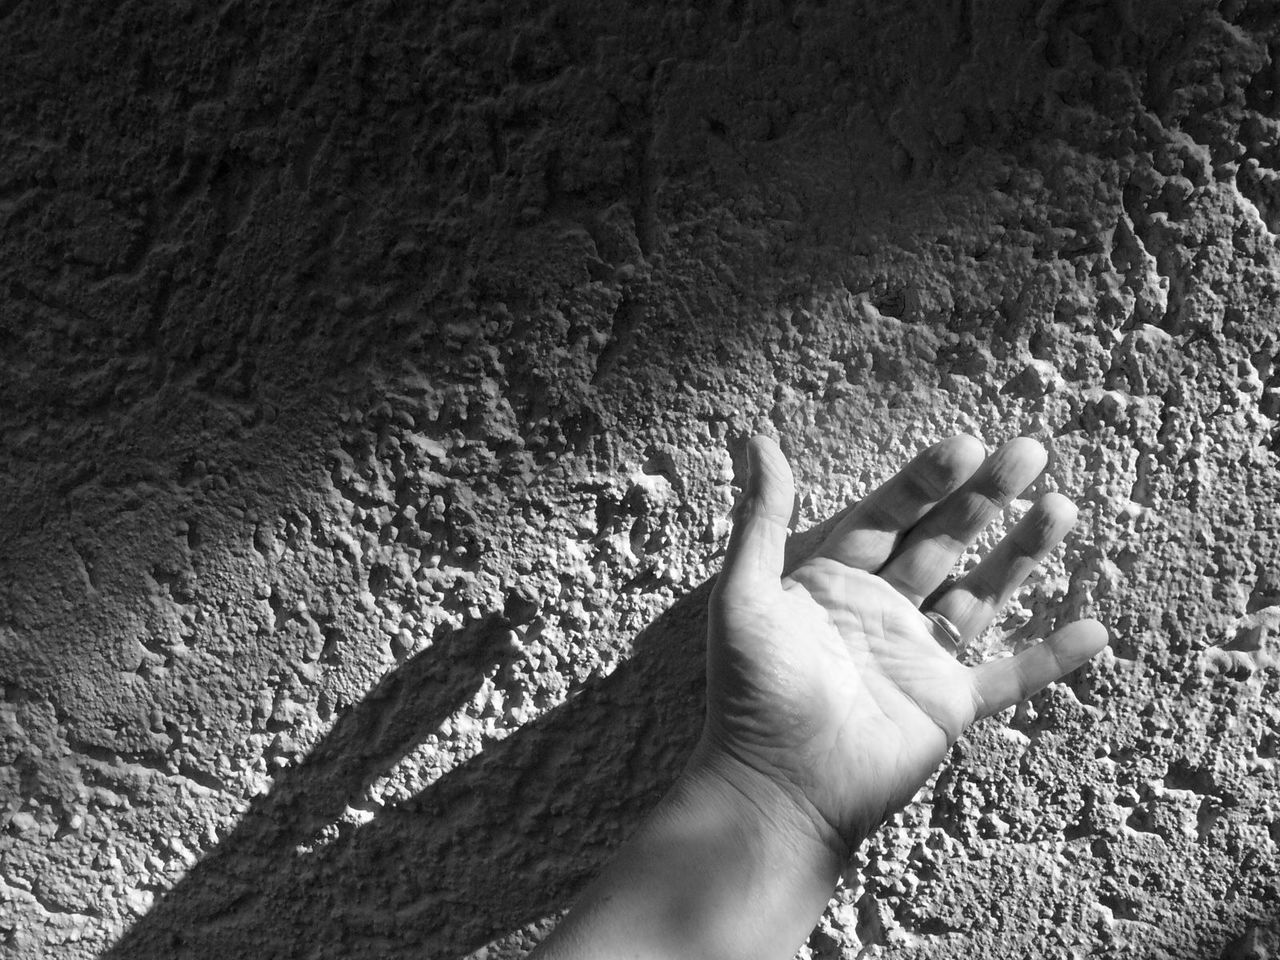 black, hand, black and white, monochrome photography, monochrome, one person, white, darkness, high angle view, nature, soil, personal perspective, lifestyles, day, sunlight, finger, leisure activity, land, close-up, outdoors, barefoot, adult, shadow